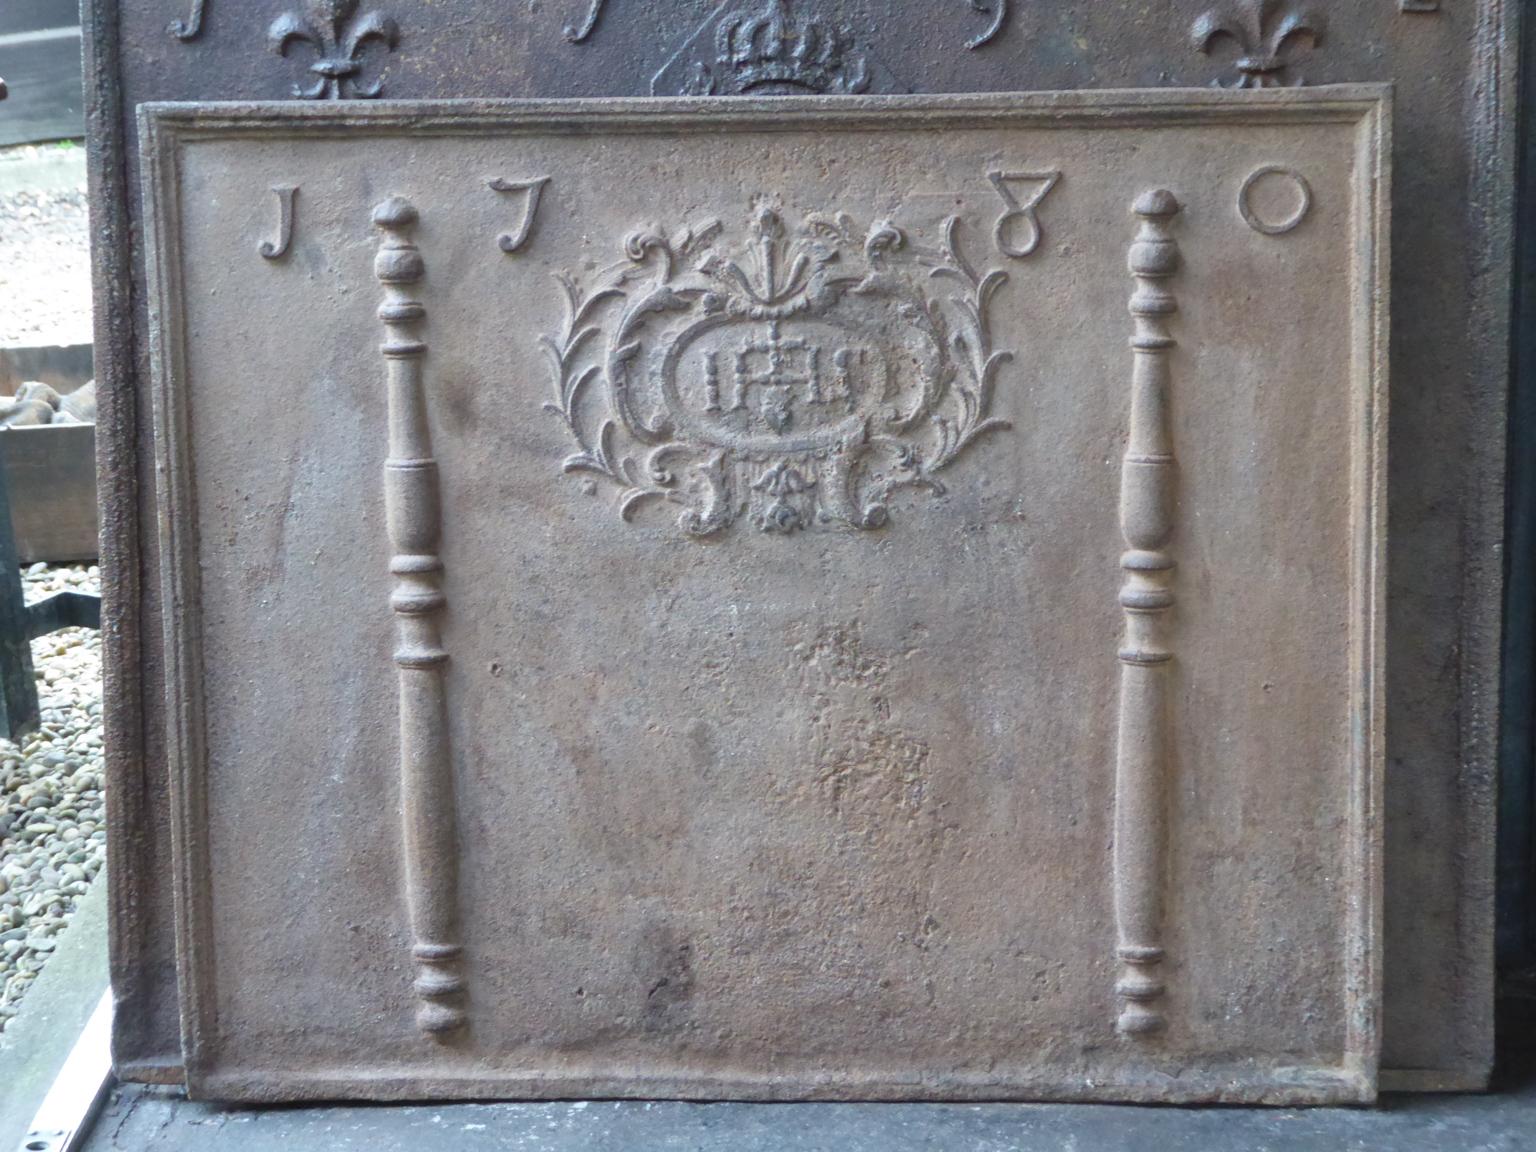 18th century Louis XV French fireback with pillars of Hercules, an IHS monogram, and the date of production 1780.

The monogram IHS stands for Iesus Hominum Salvator (Jesus the Savior of Humanity) or In Hoc Signo (In this sign will you win). The